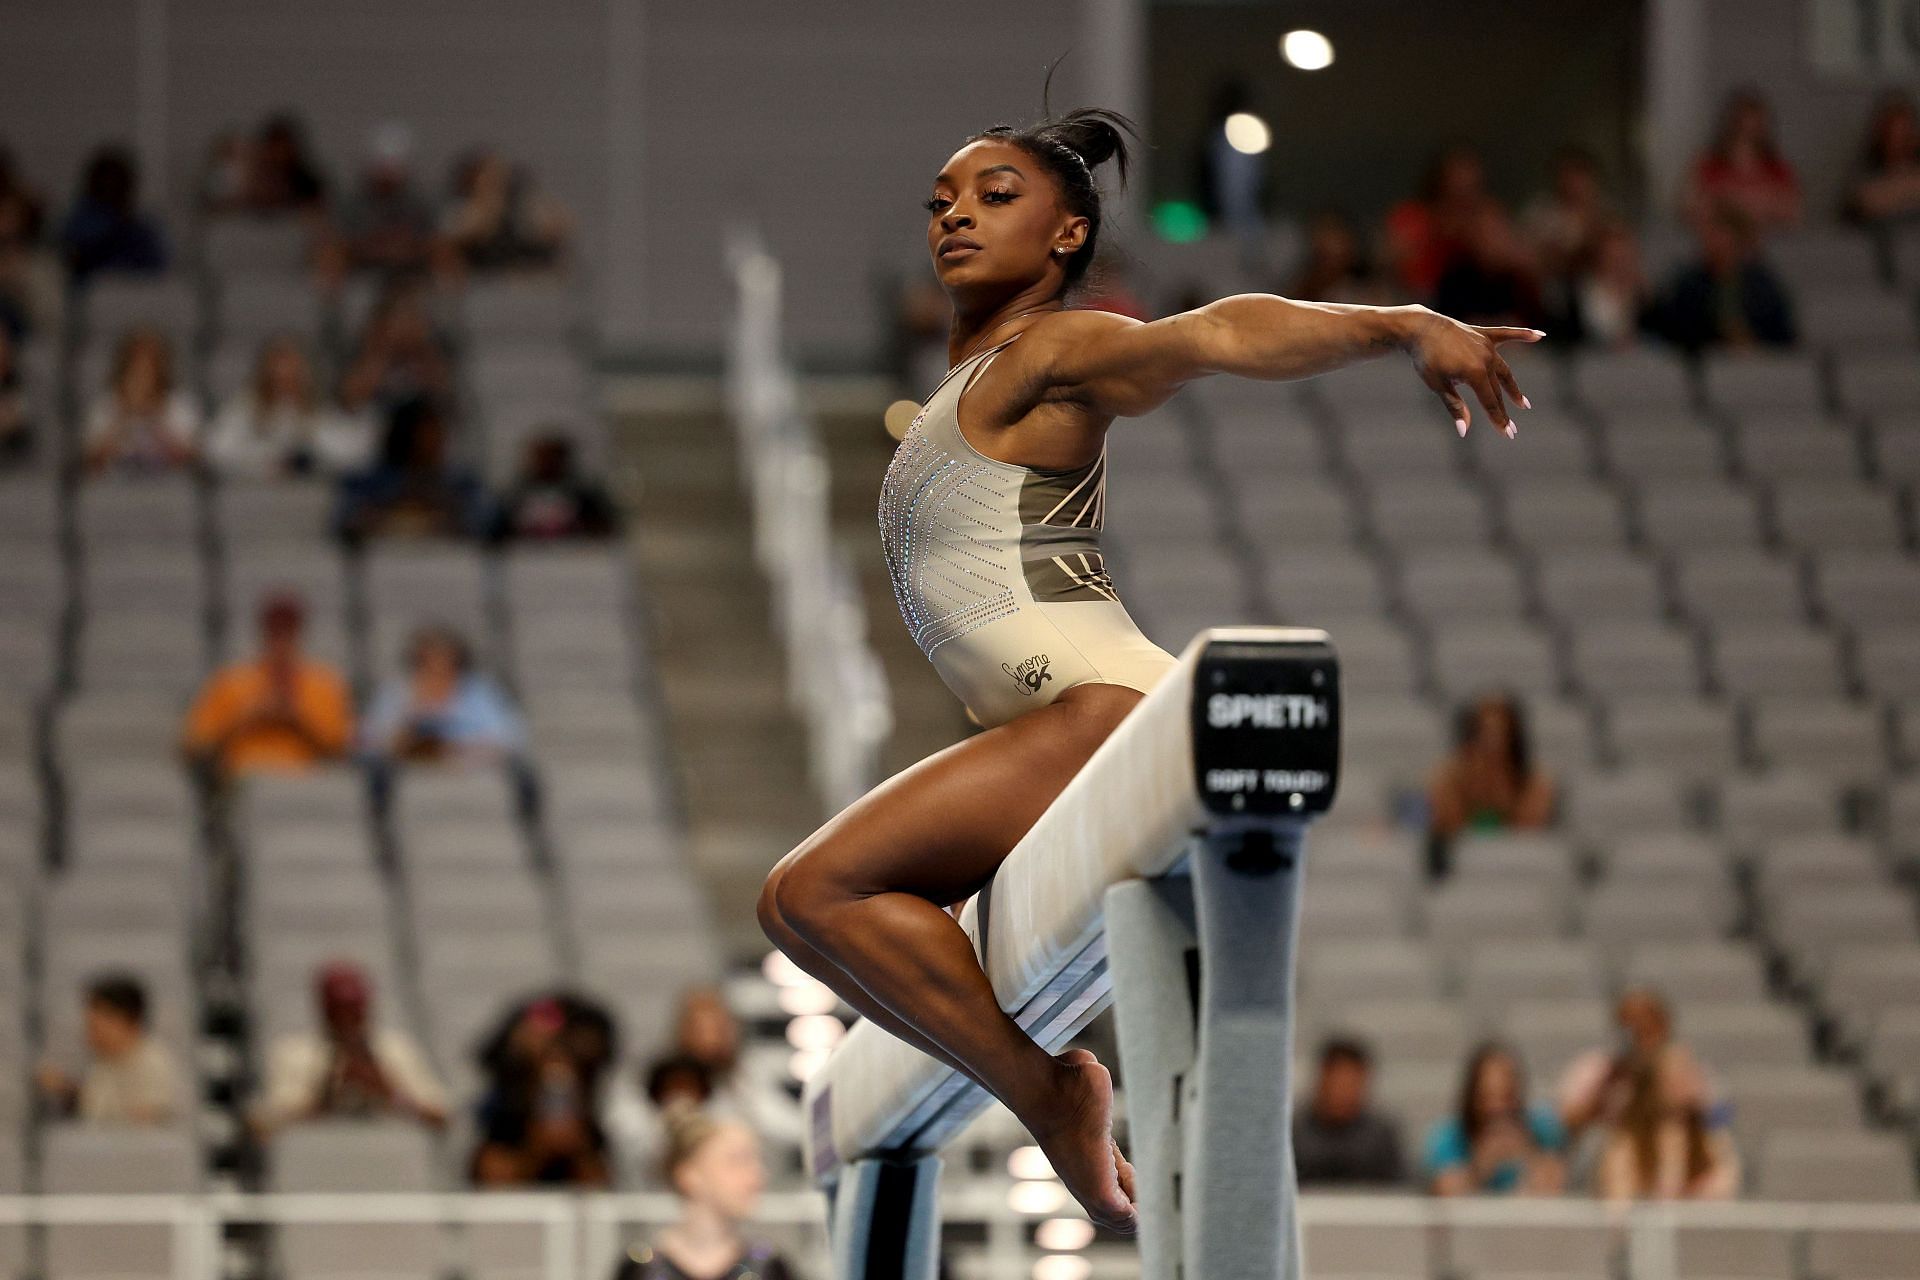 Simone Biles warms up on the balance beam before the 2024 Xfinity U.S. Gymnastics Championships in Fort Worth, Texas.